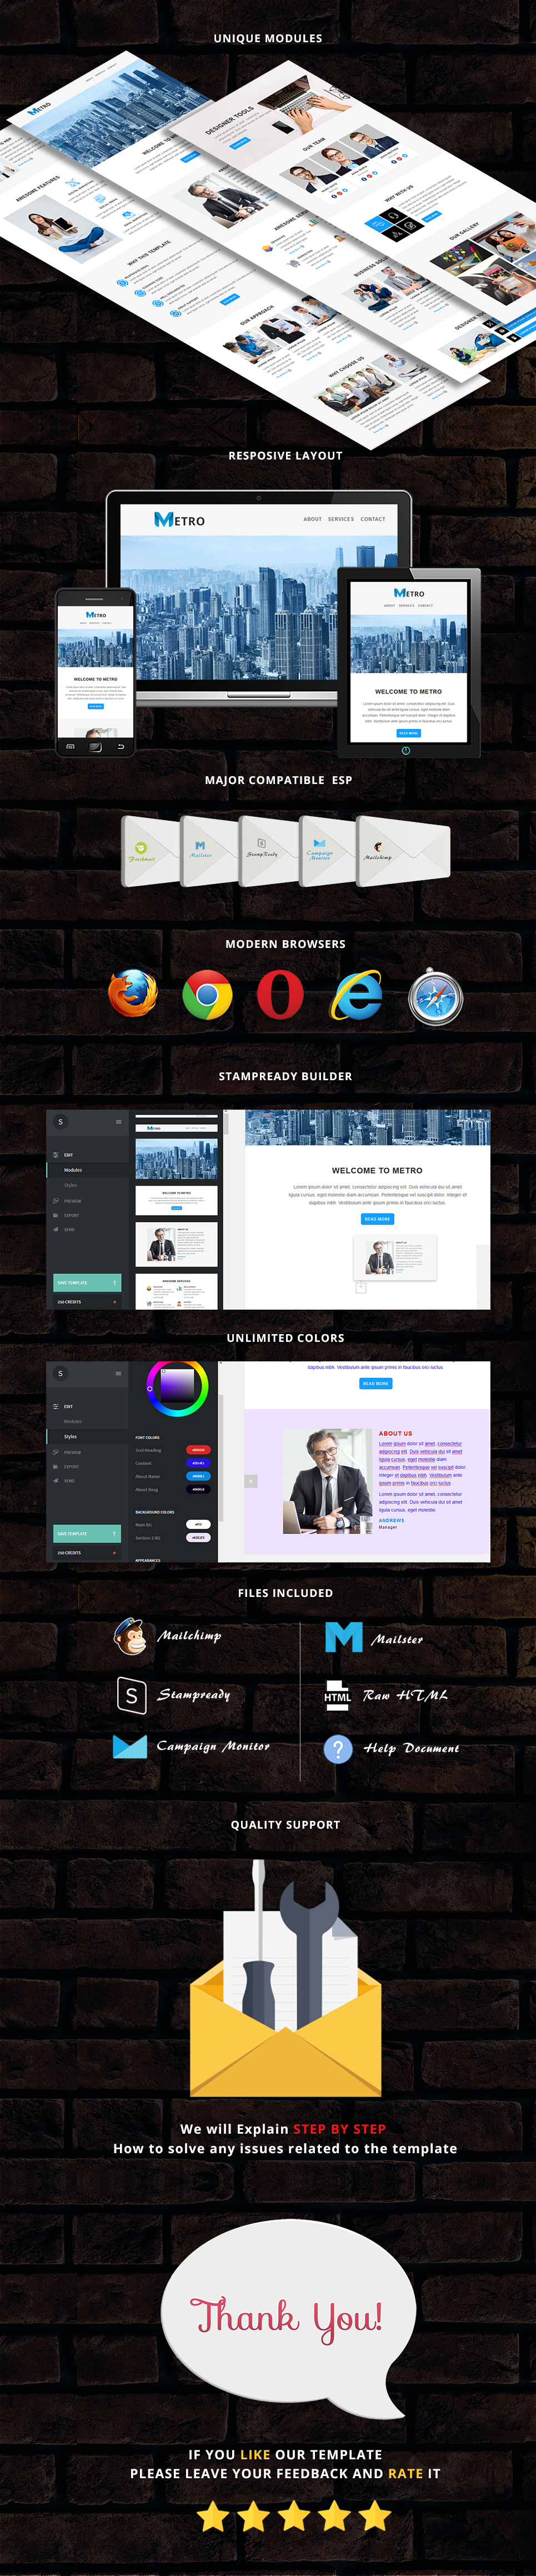 Metro - Responsive Email Template + Stampready Builder